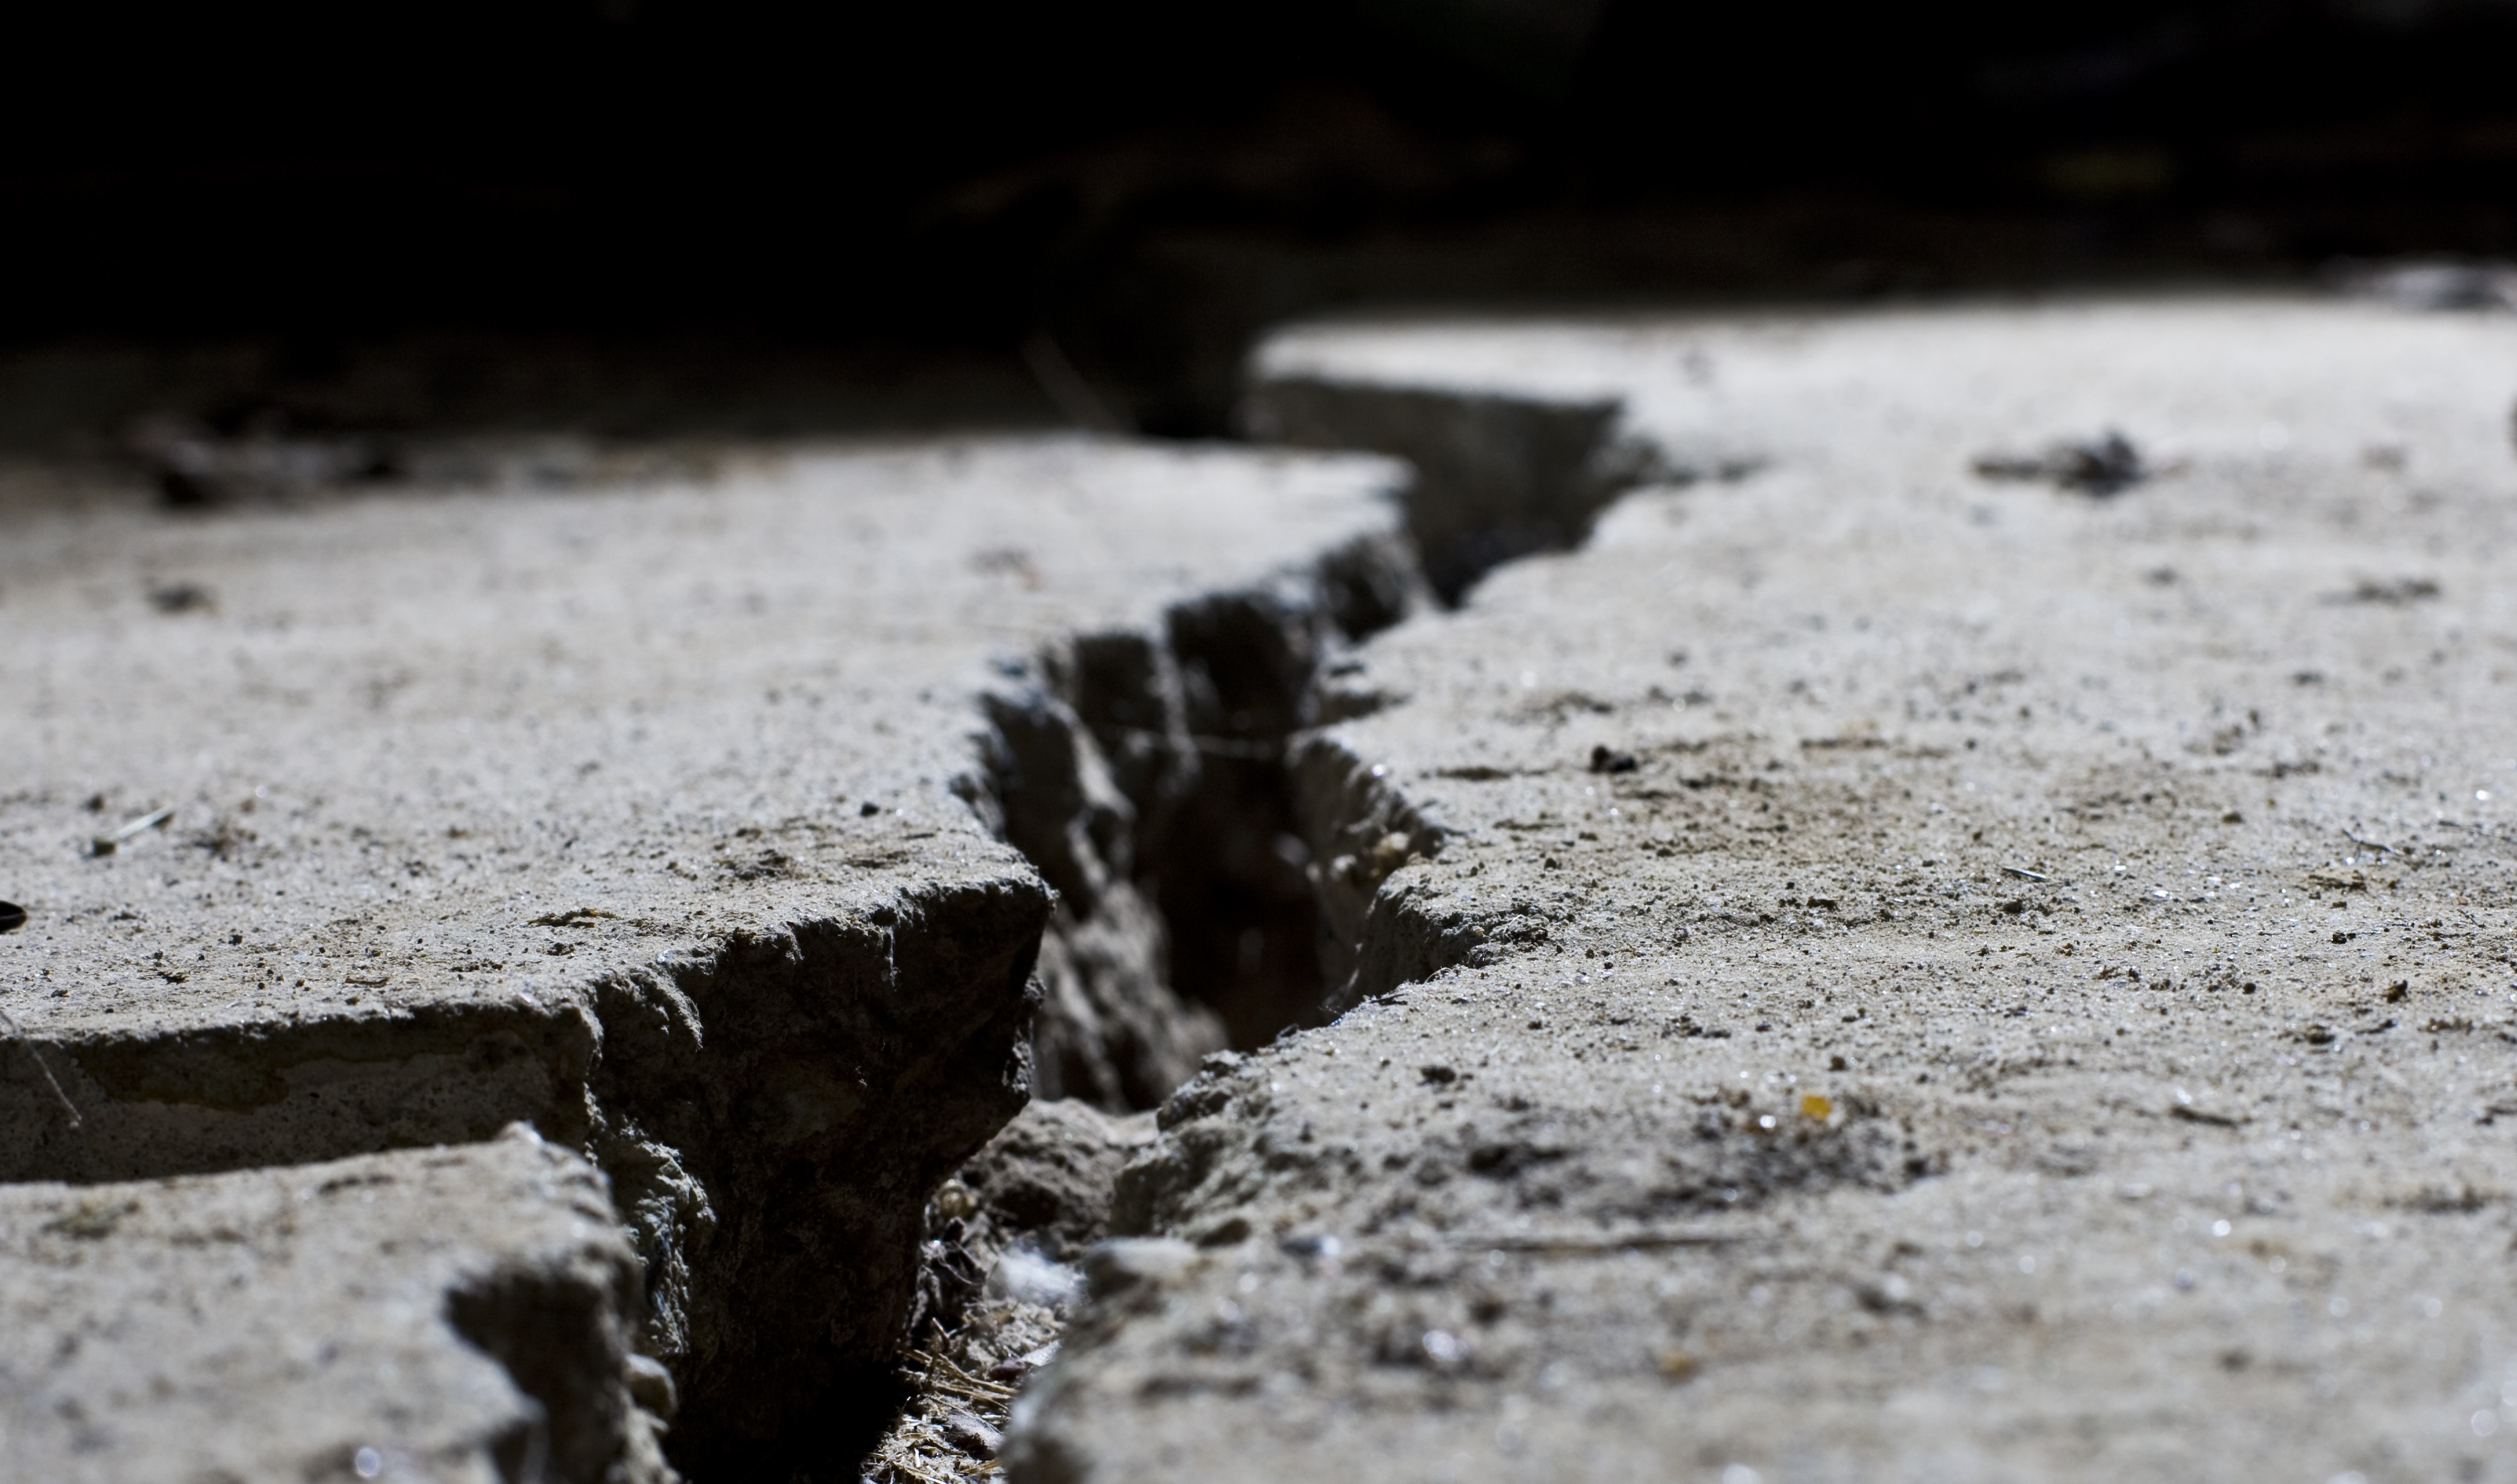 Large earthquakes can be heralded by early warning signs, say seismologists